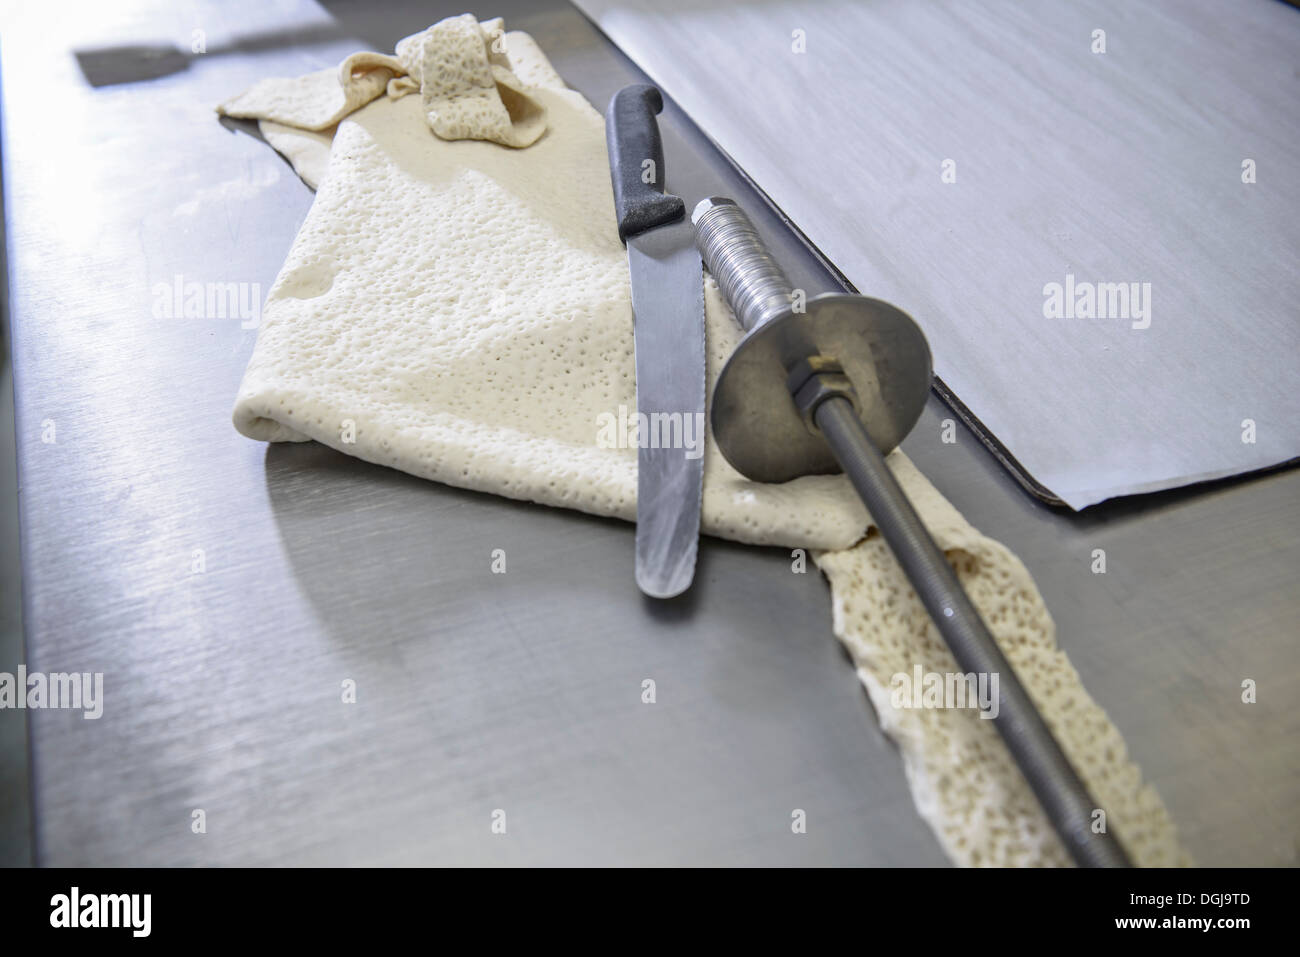 Offcut of dough, knife and rolling instrument in bakery Stock Photo